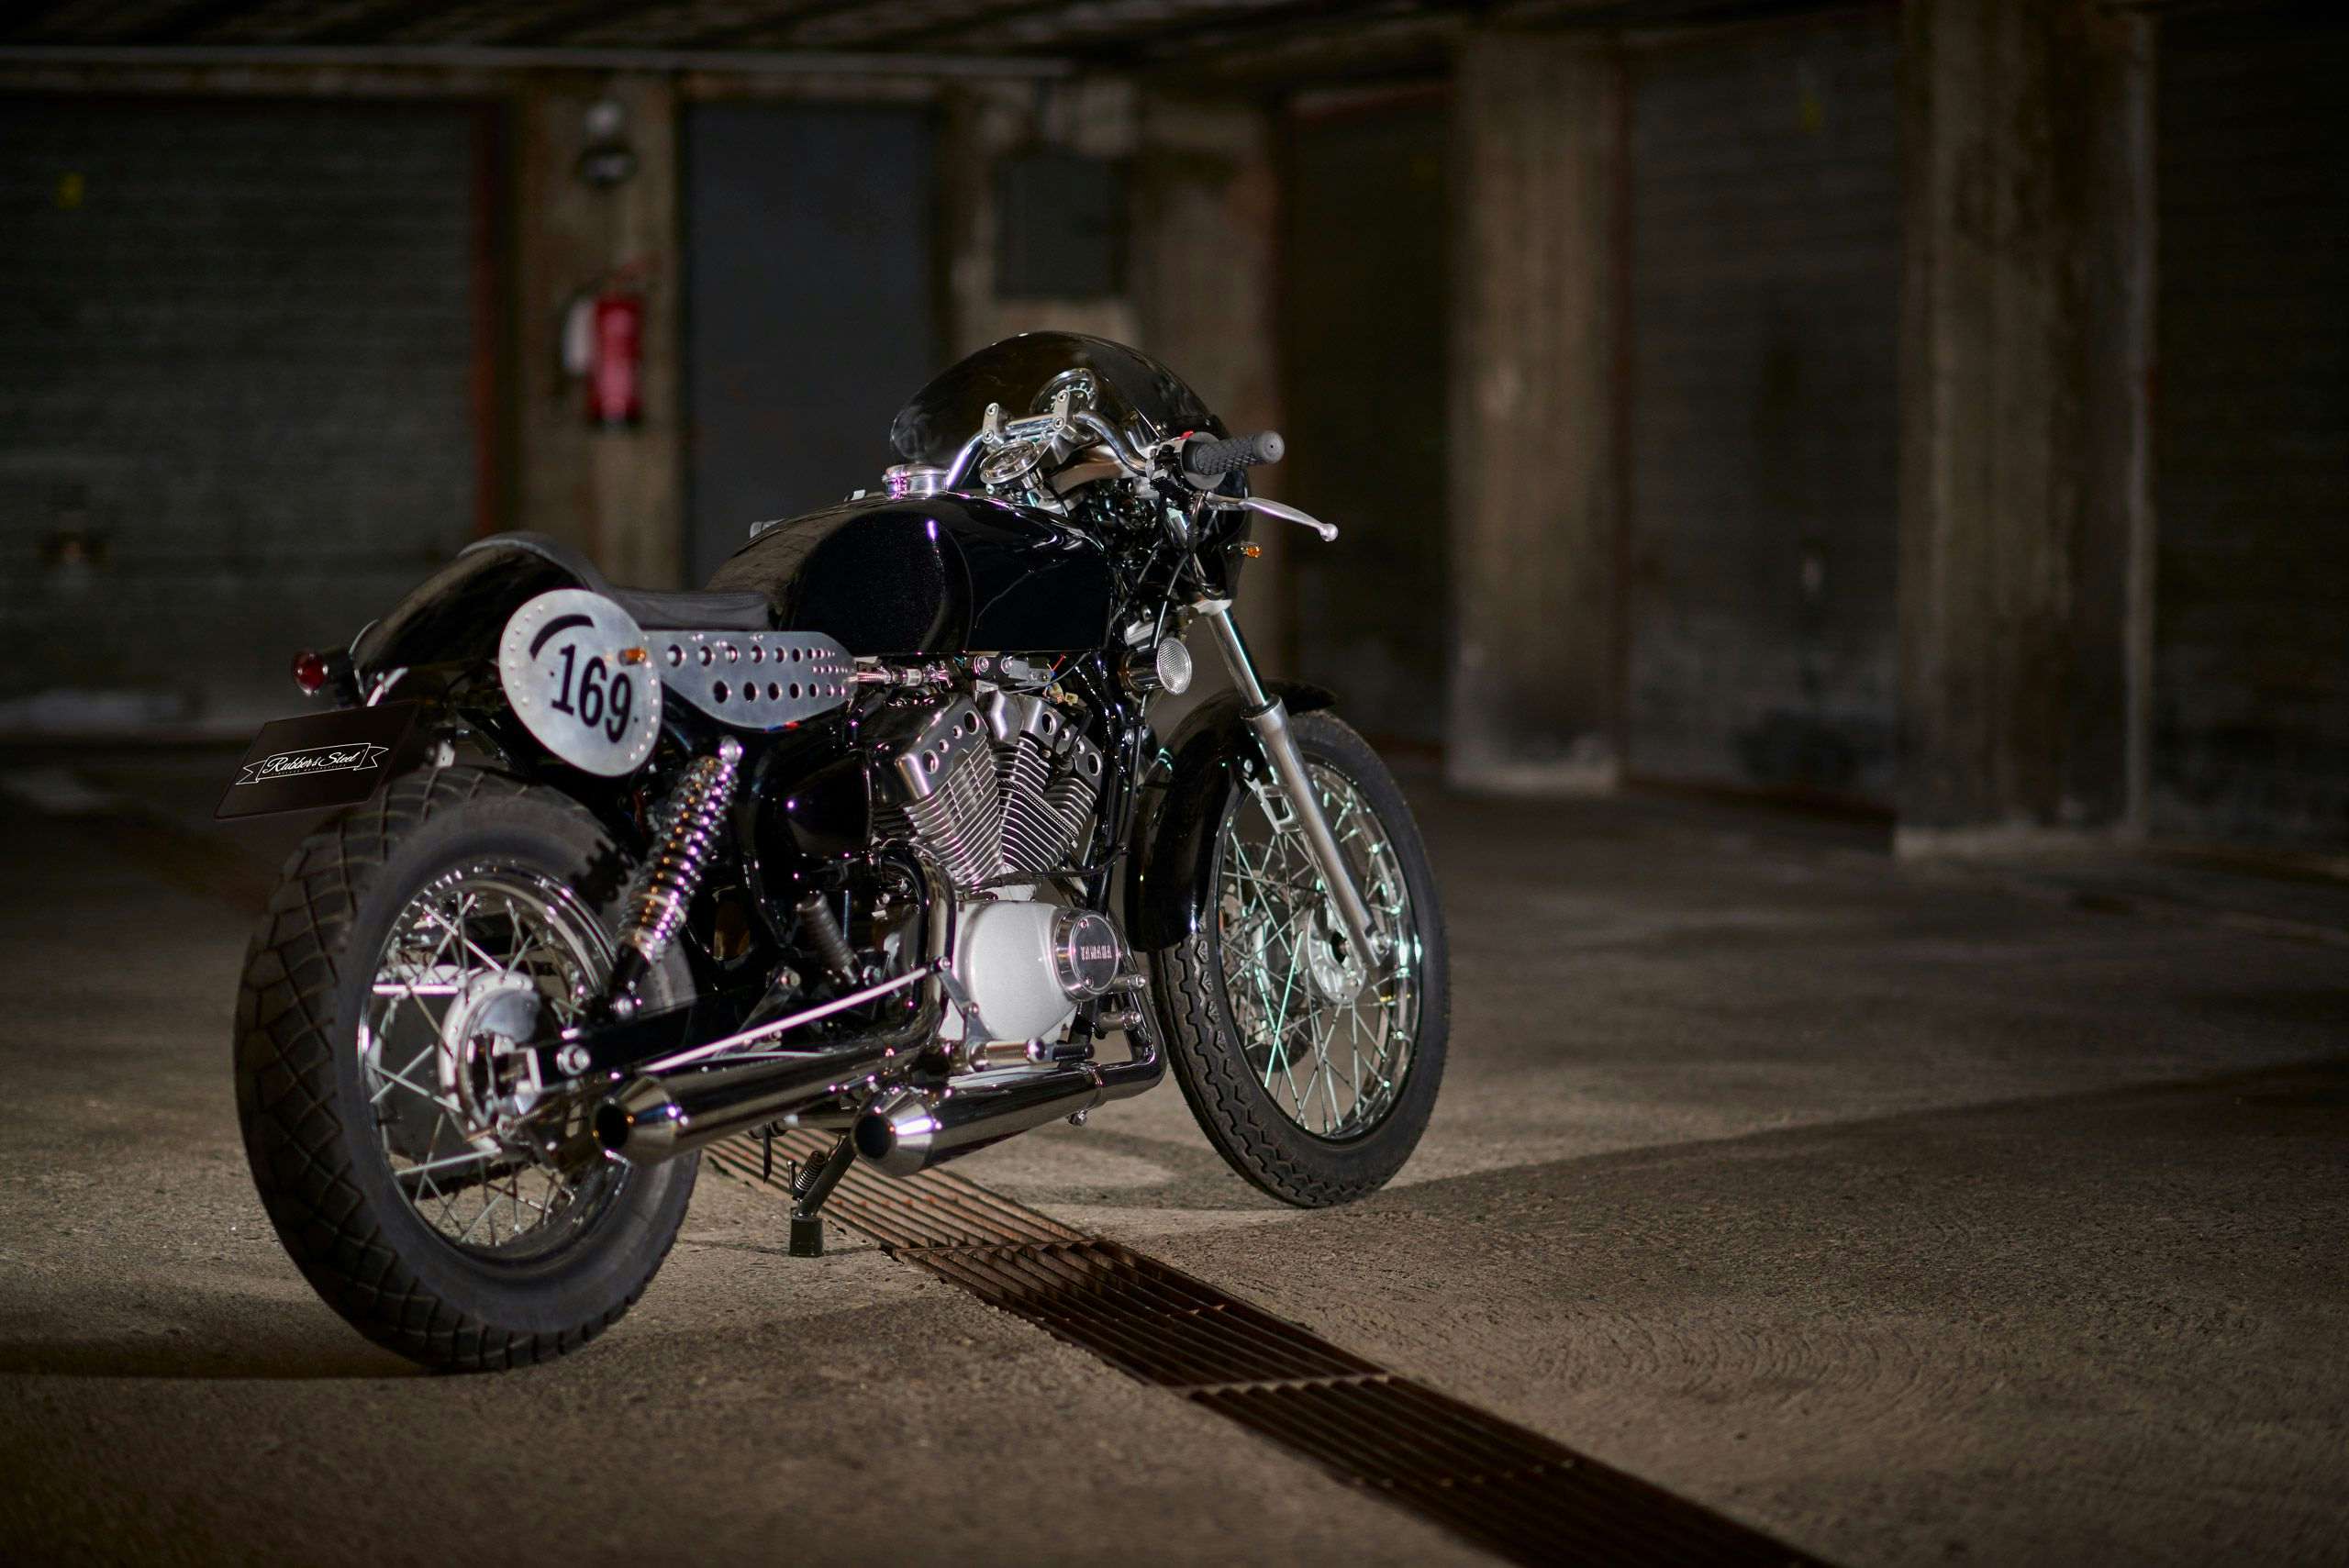 Yamaha Virago 125 cafe racer kit by Rubber and Steel. Photography by Xavier Wendling.